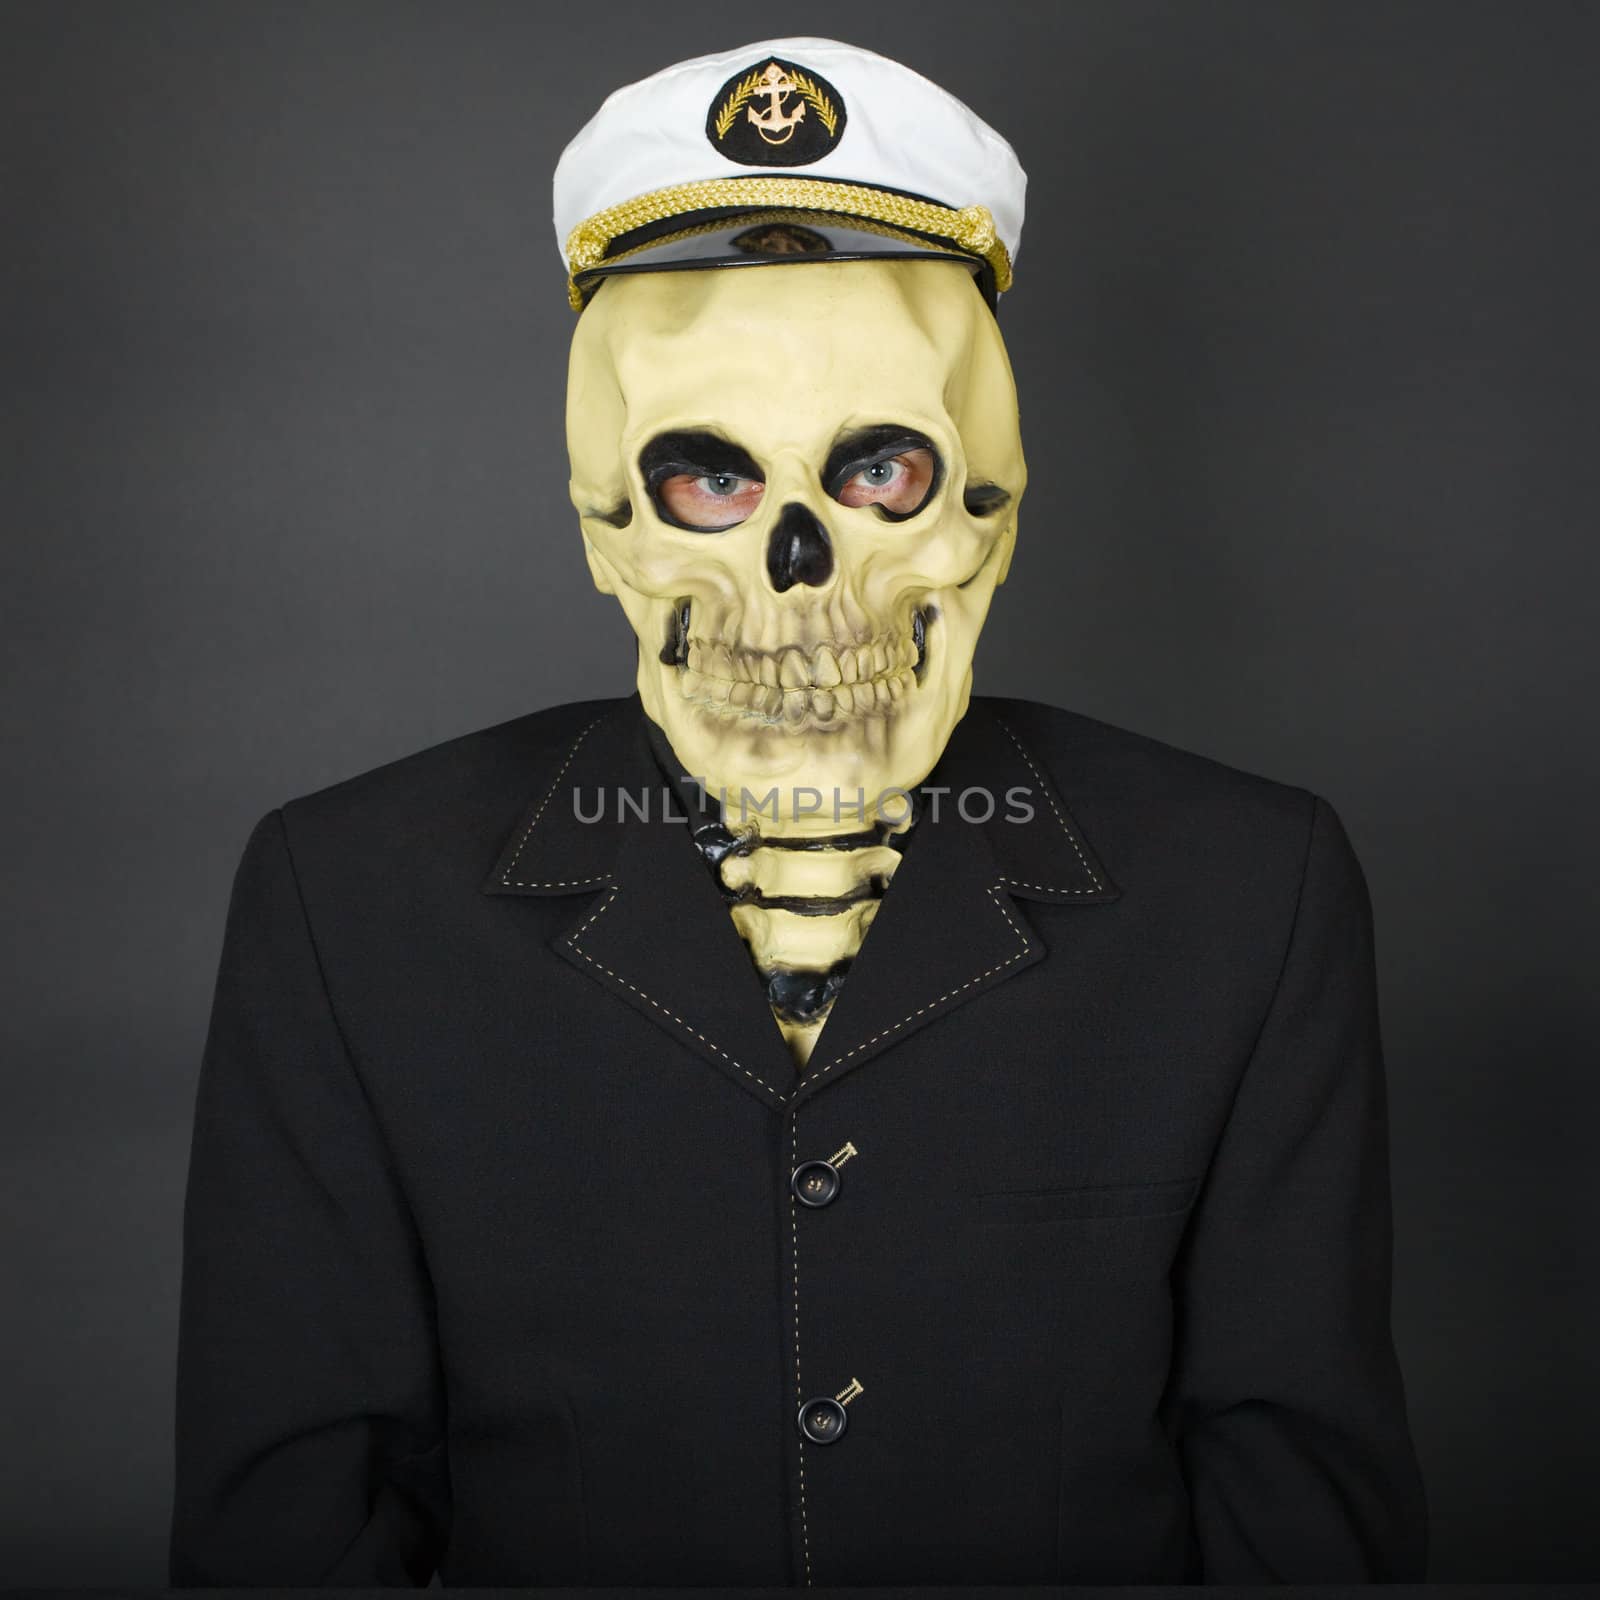 The man - a skeleton in a naval cap on a dark background